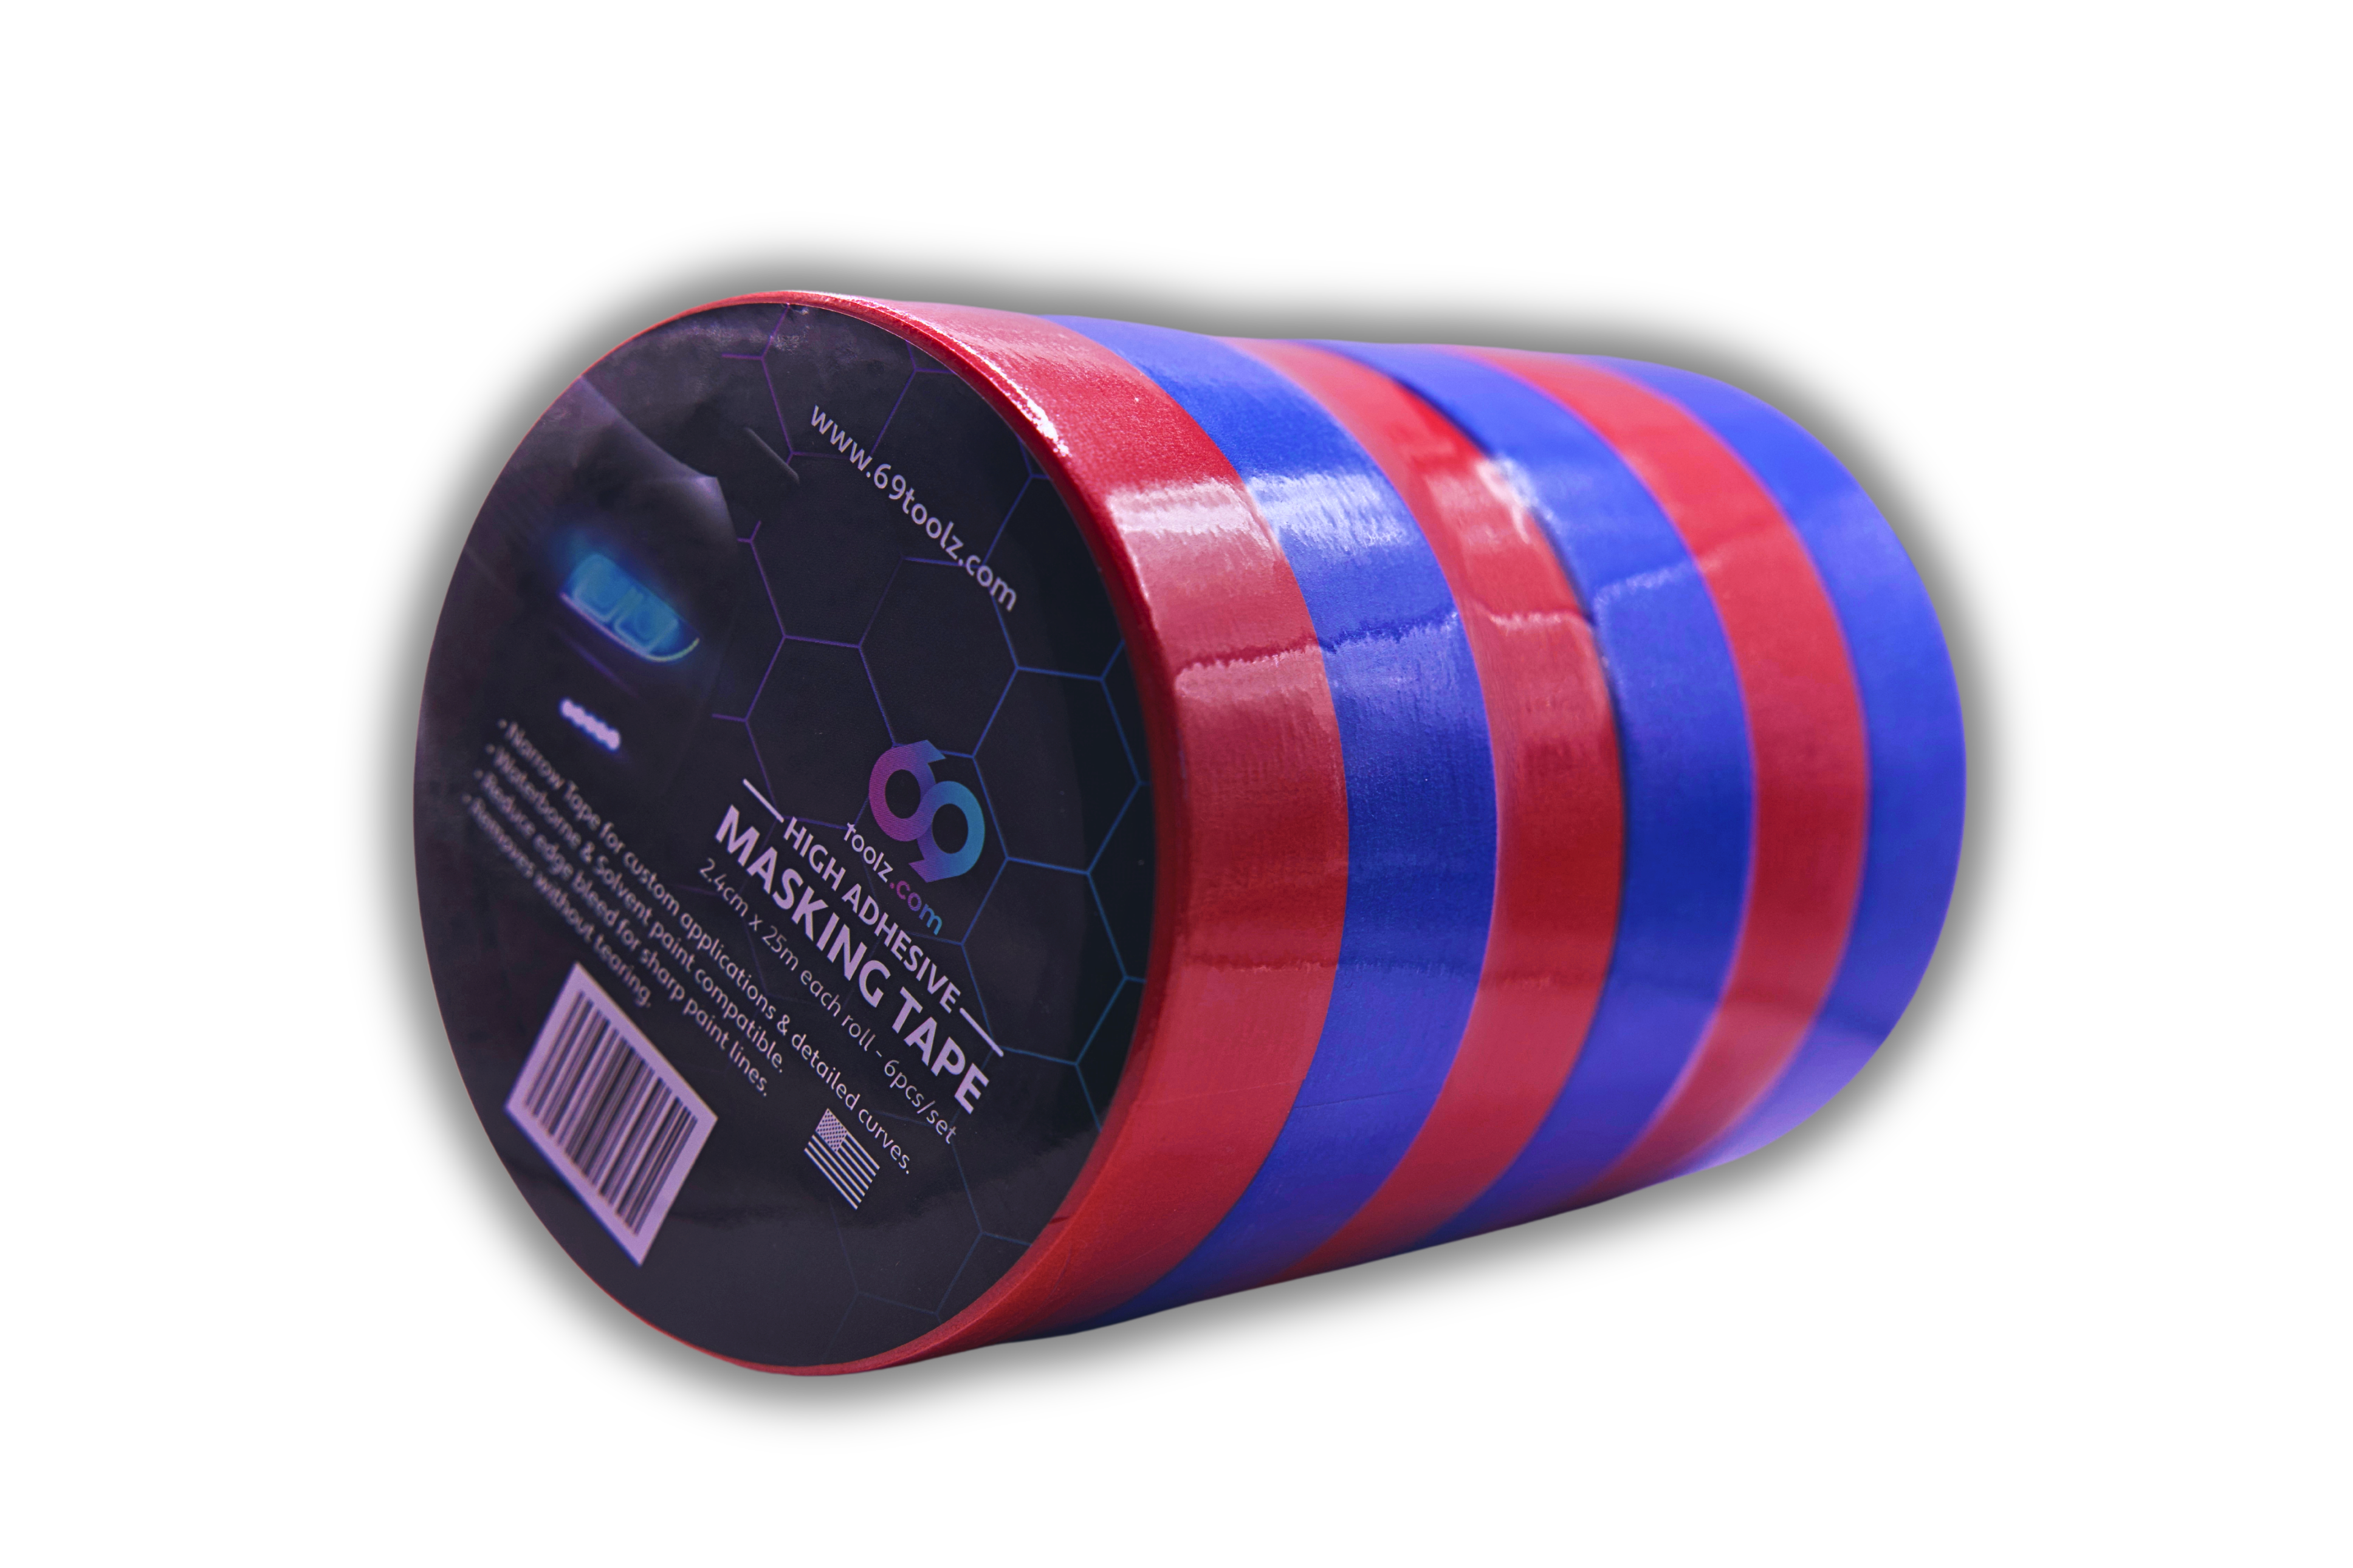 Rolls of .94 inch red and blue Precision Masking Tape, ready for detailed automotive and design work.